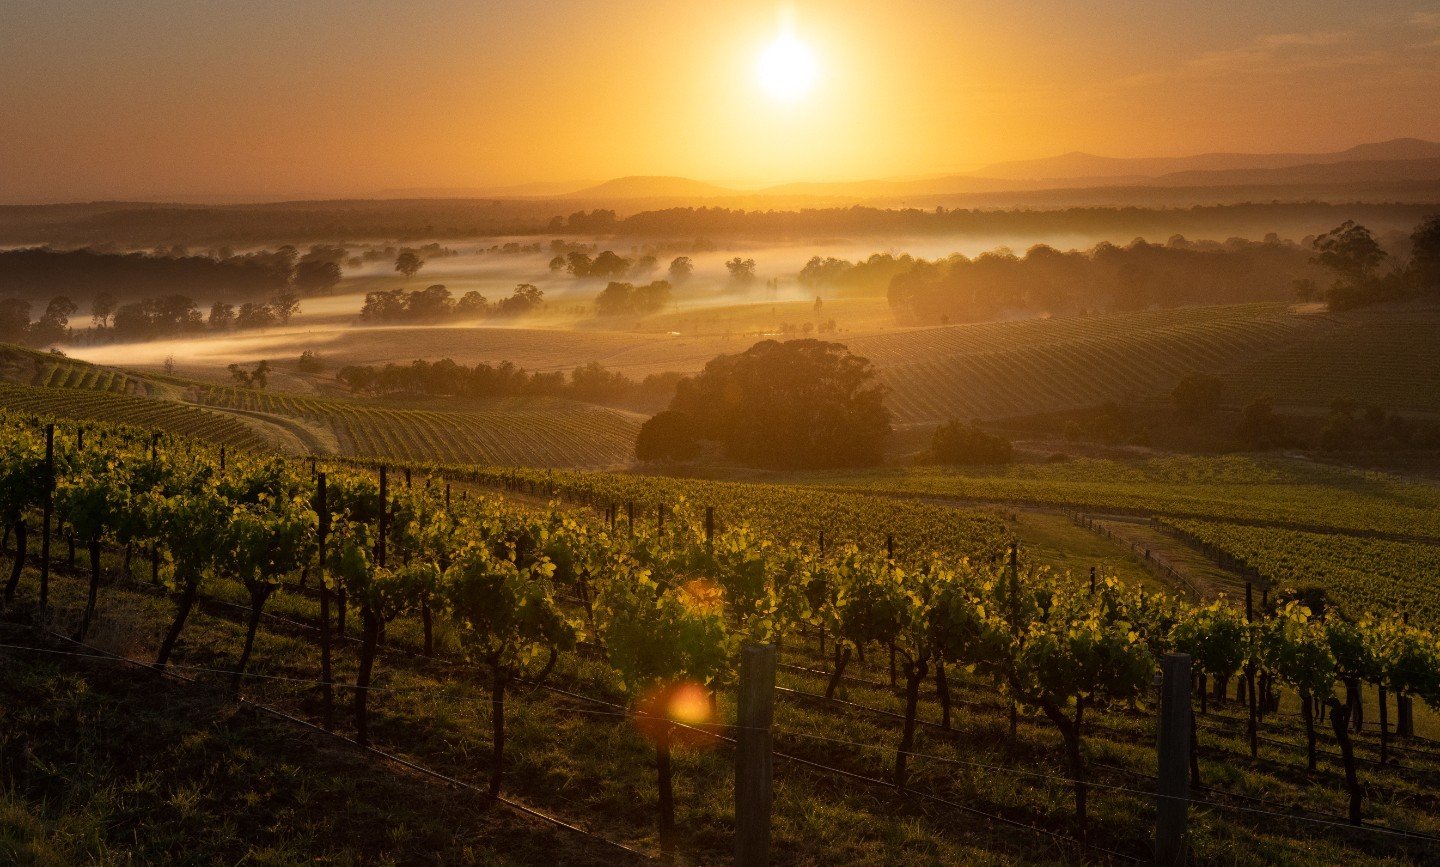 Did you know that in 2028, the Hunter Valley will celebrate 200 years of winemaking and grape growing as Australia's oldest wine region?

The Hunter River Vineyard Association was established in 1847, nineteen years after the first vineyard plantings